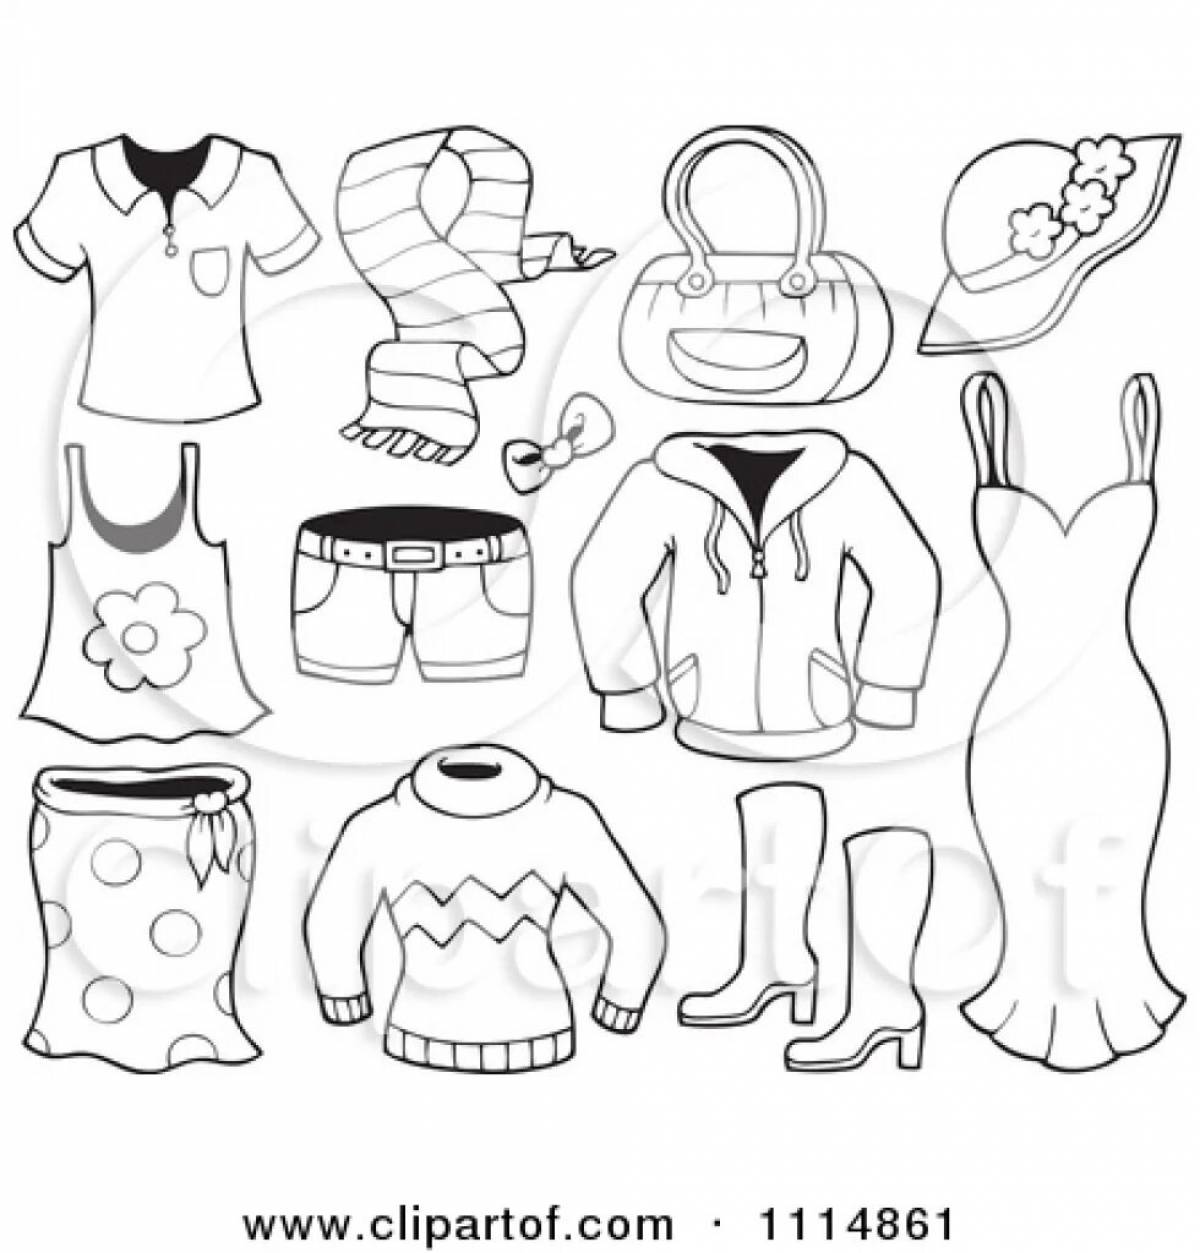 Cute baby winter clothes coloring page